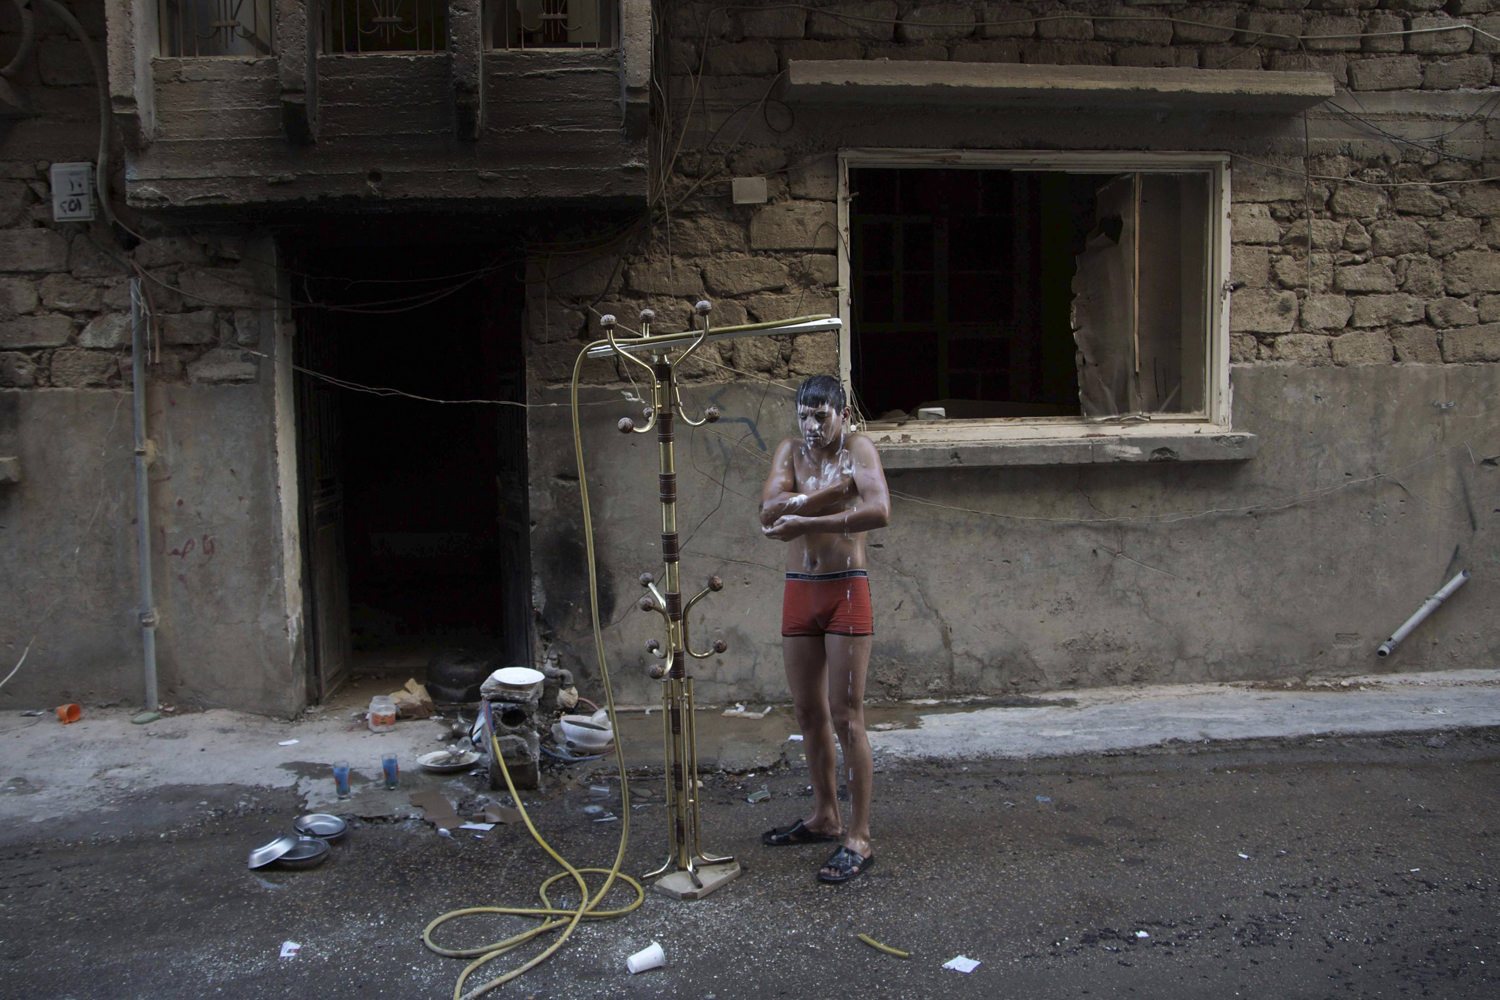 A Free Syrian Army fighter takes a shower outdoors to beat the heat in Deir al-Zor